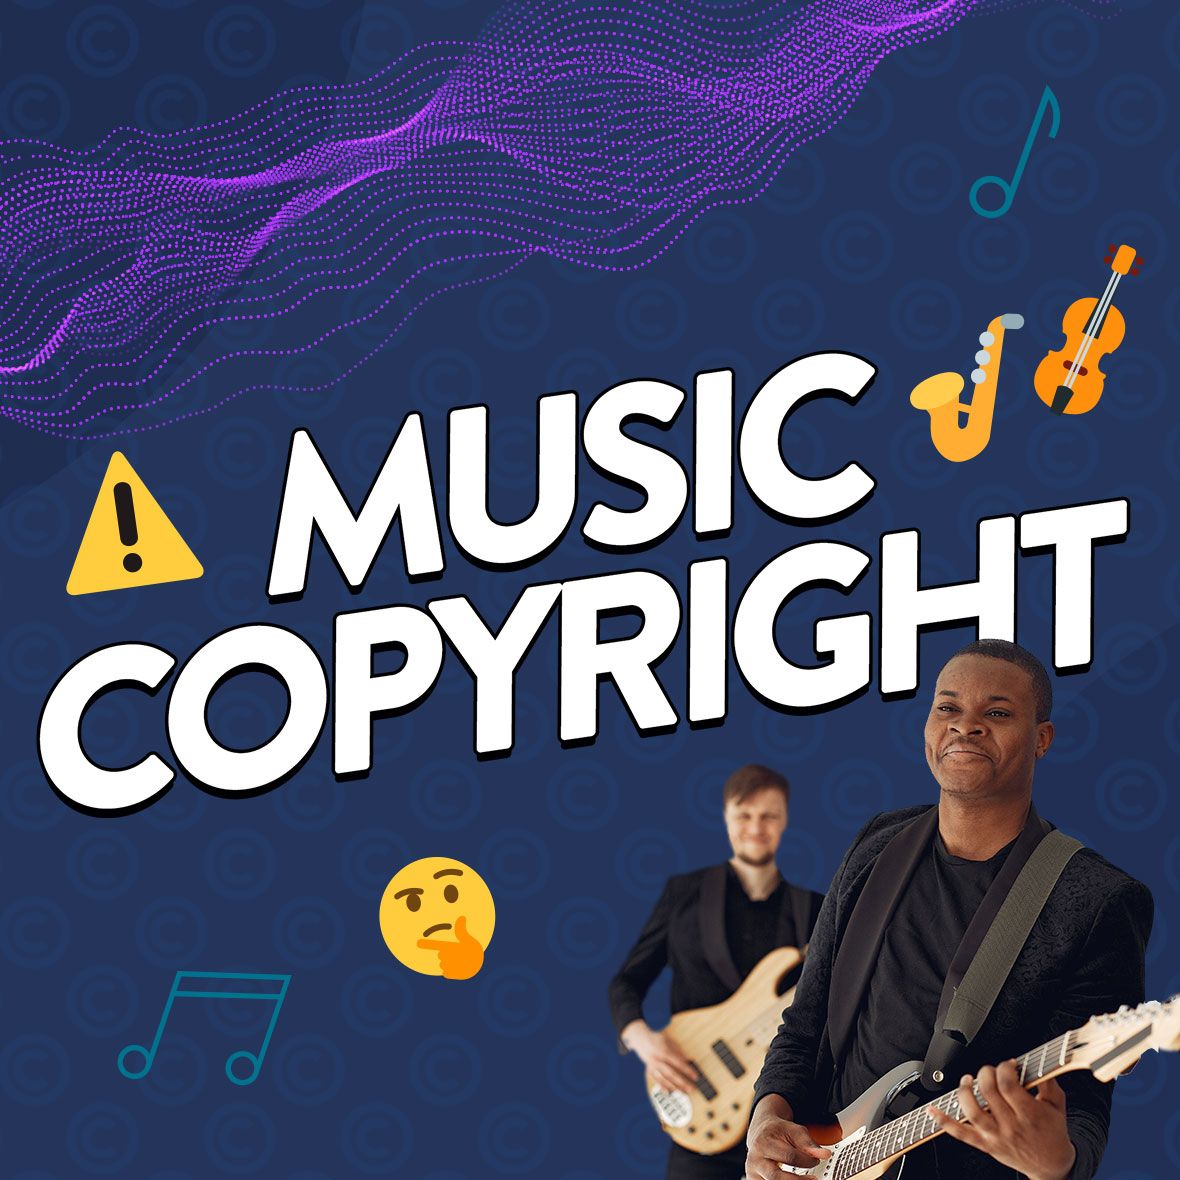 Image of musicians in front of text that says 'Music Copyright' and a selection of music-related emojis.